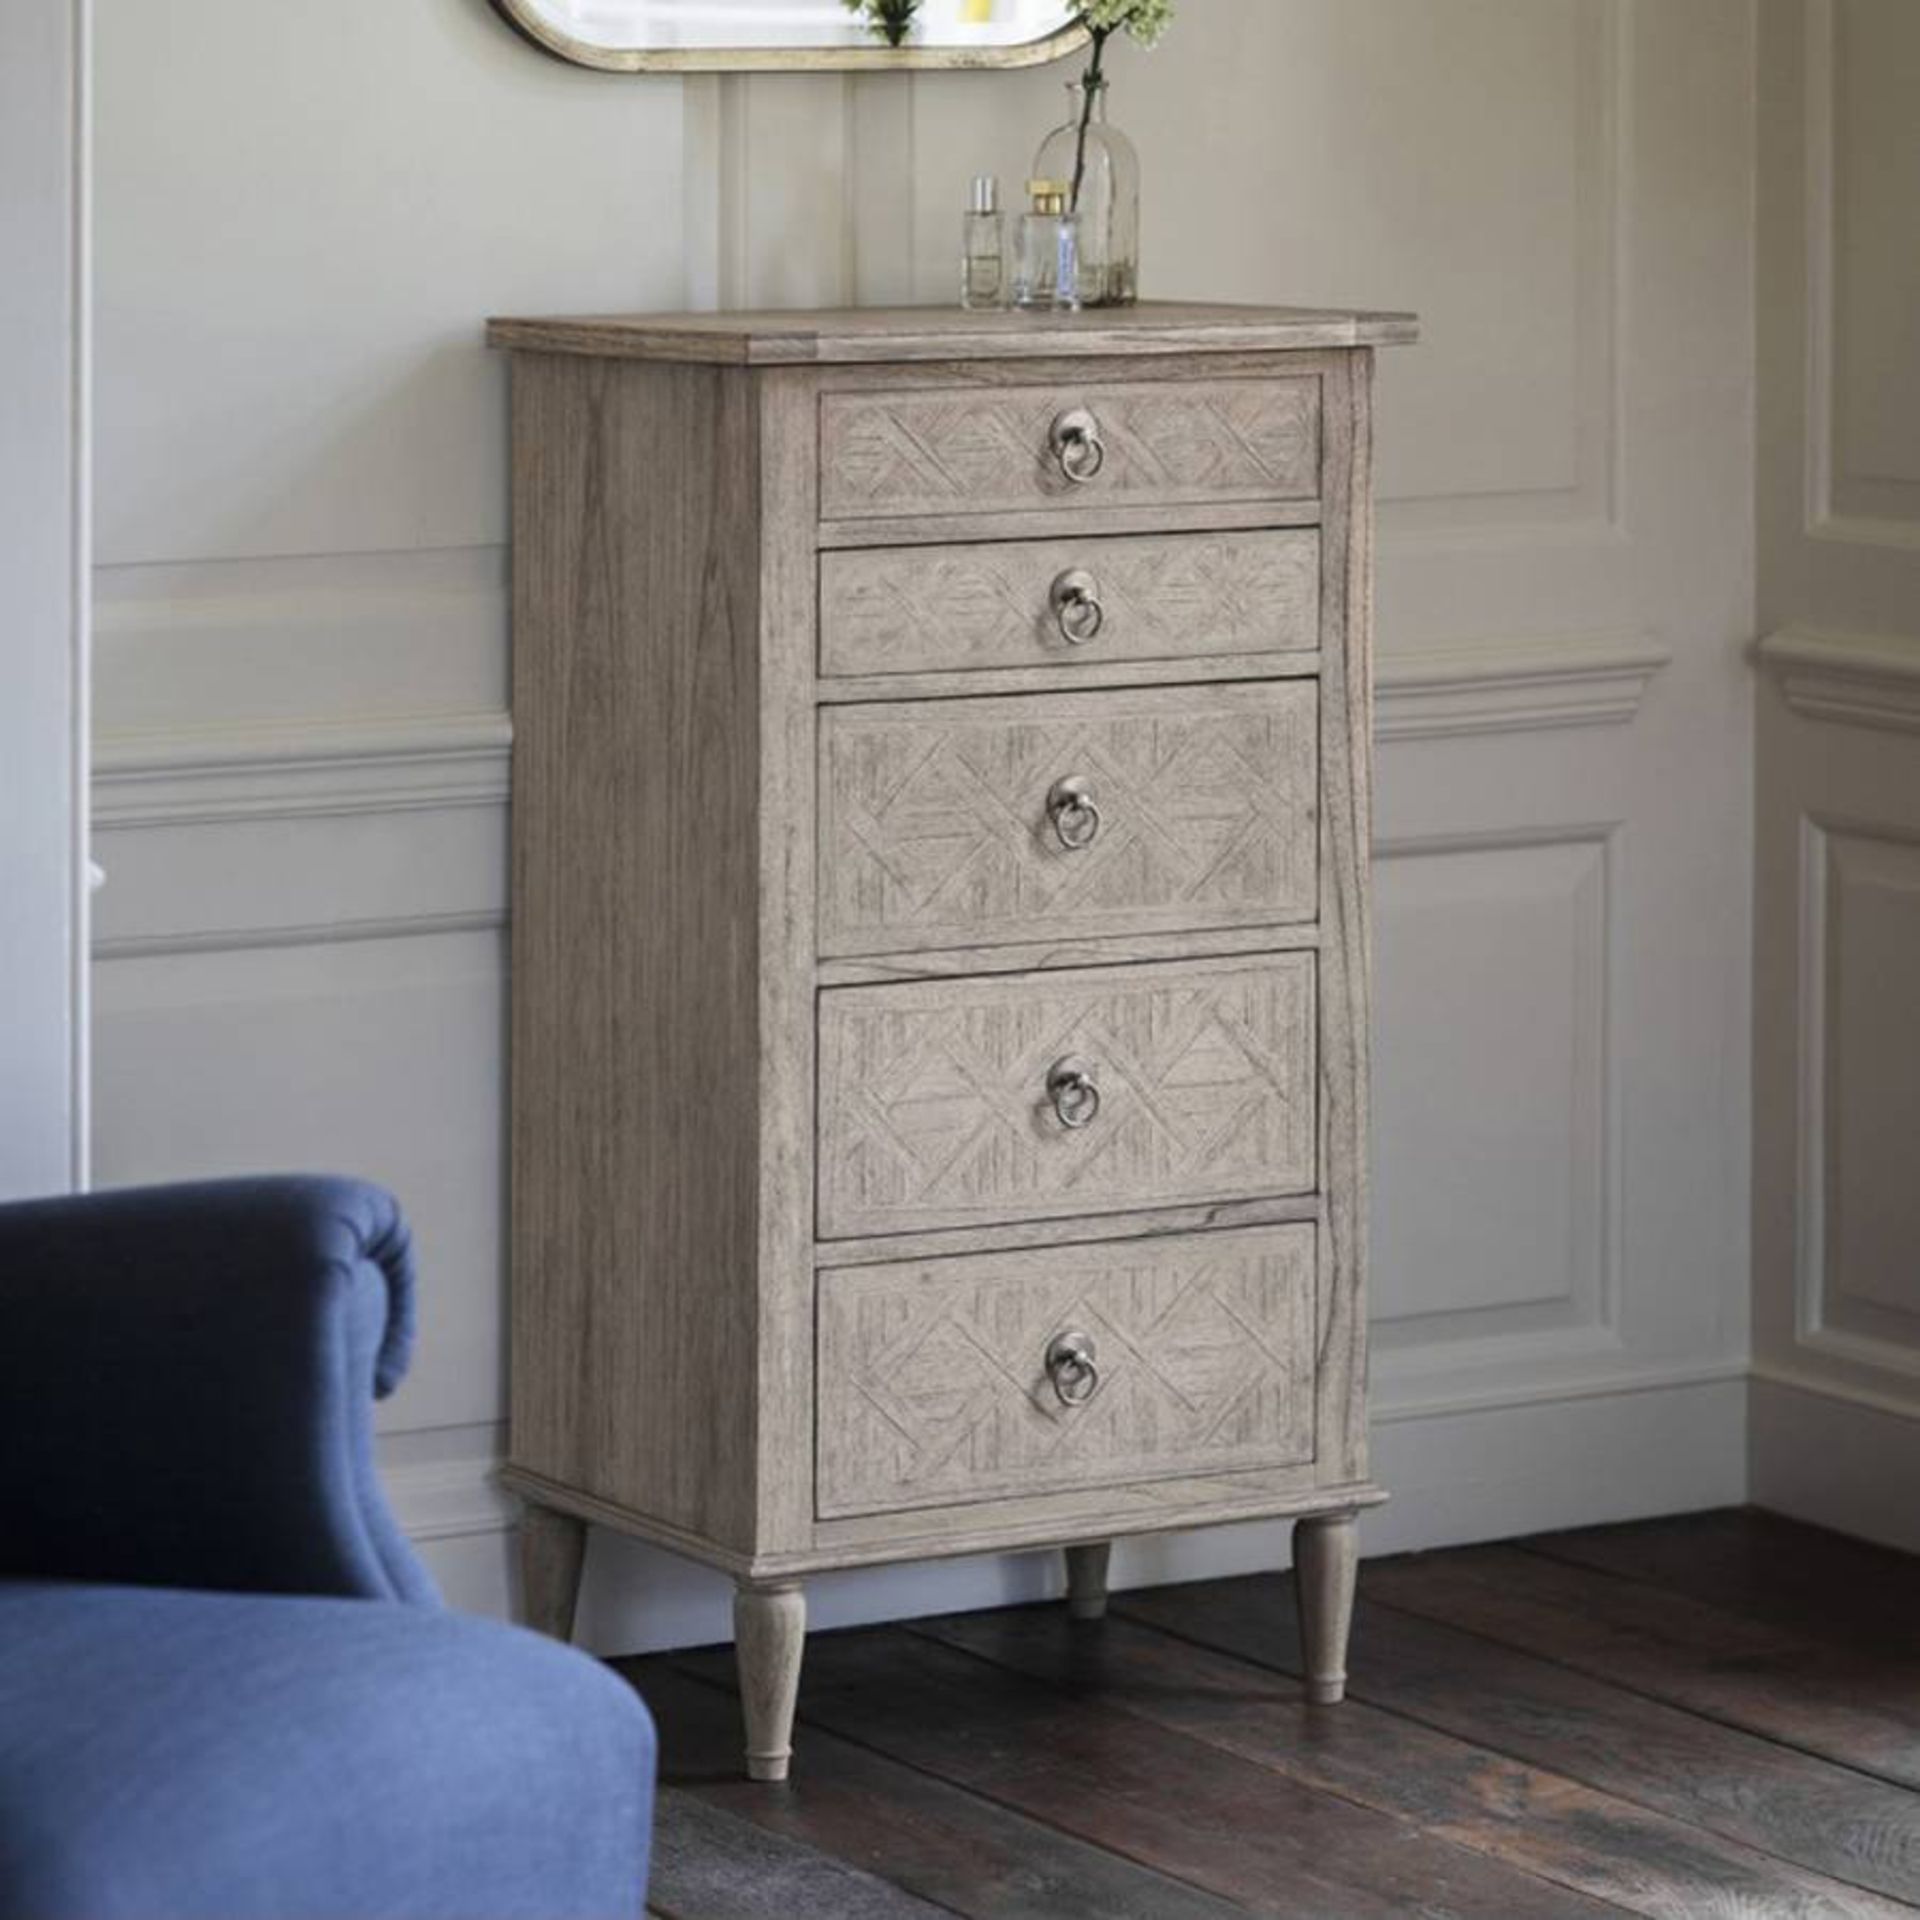 Mustique 5 Drawer Lingerie Chest Our Mustique Collection Is Made From Mindy Wood And Lightly Brushed